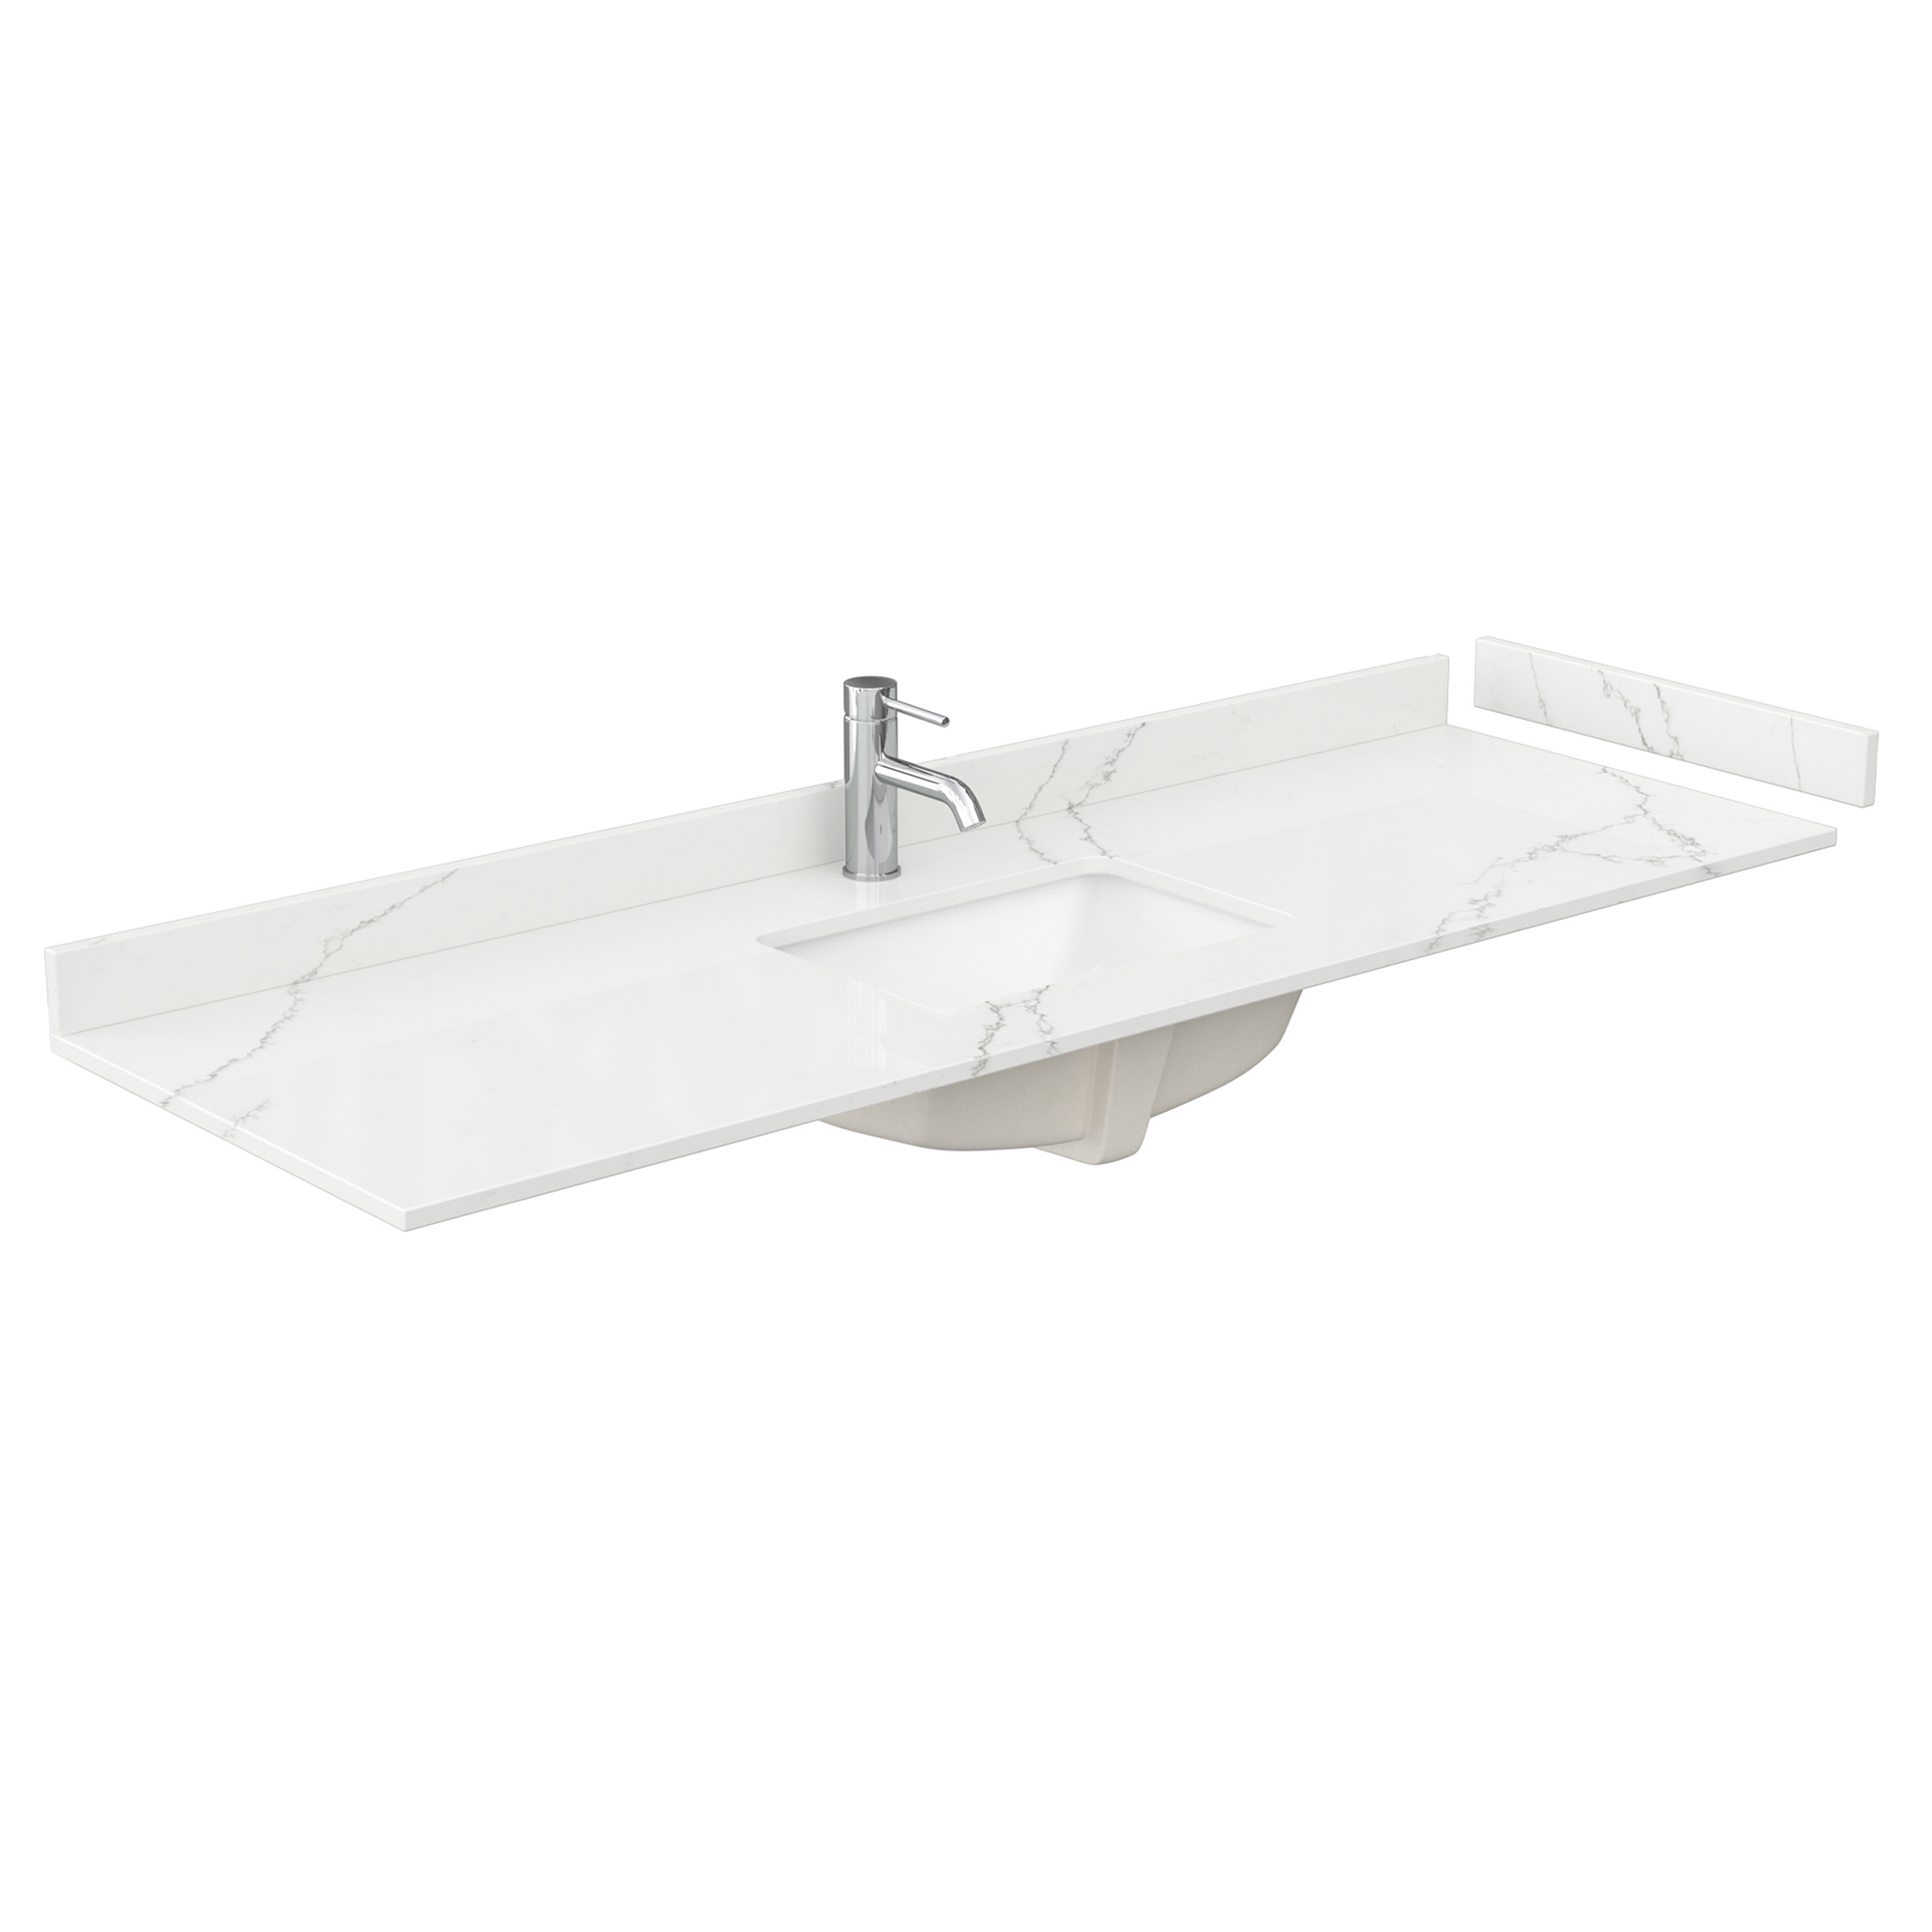 66" Single Countertop - Giotto Quartz (8066) with Undermount Square Sink (1-Hole) - Includes Backsplash and Sidesplash WCFQC166STOPUNSGT